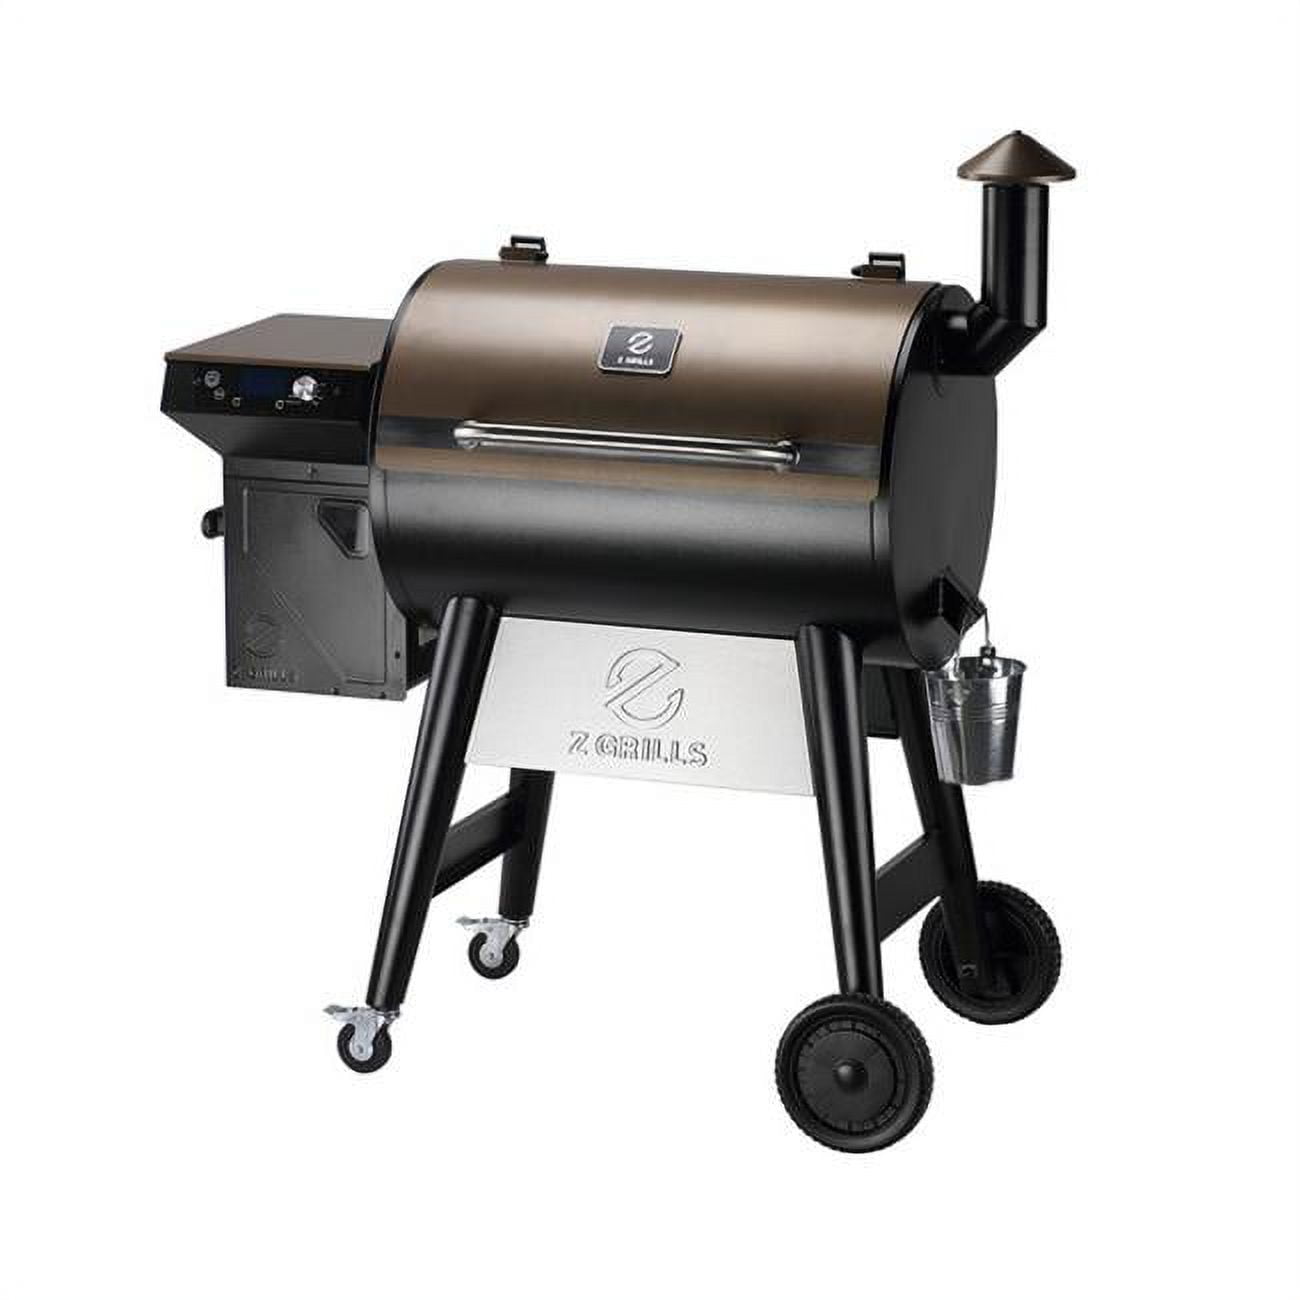 Z GRILLS 202 sq. in. Portable Pellet Grill & Electric Smoker